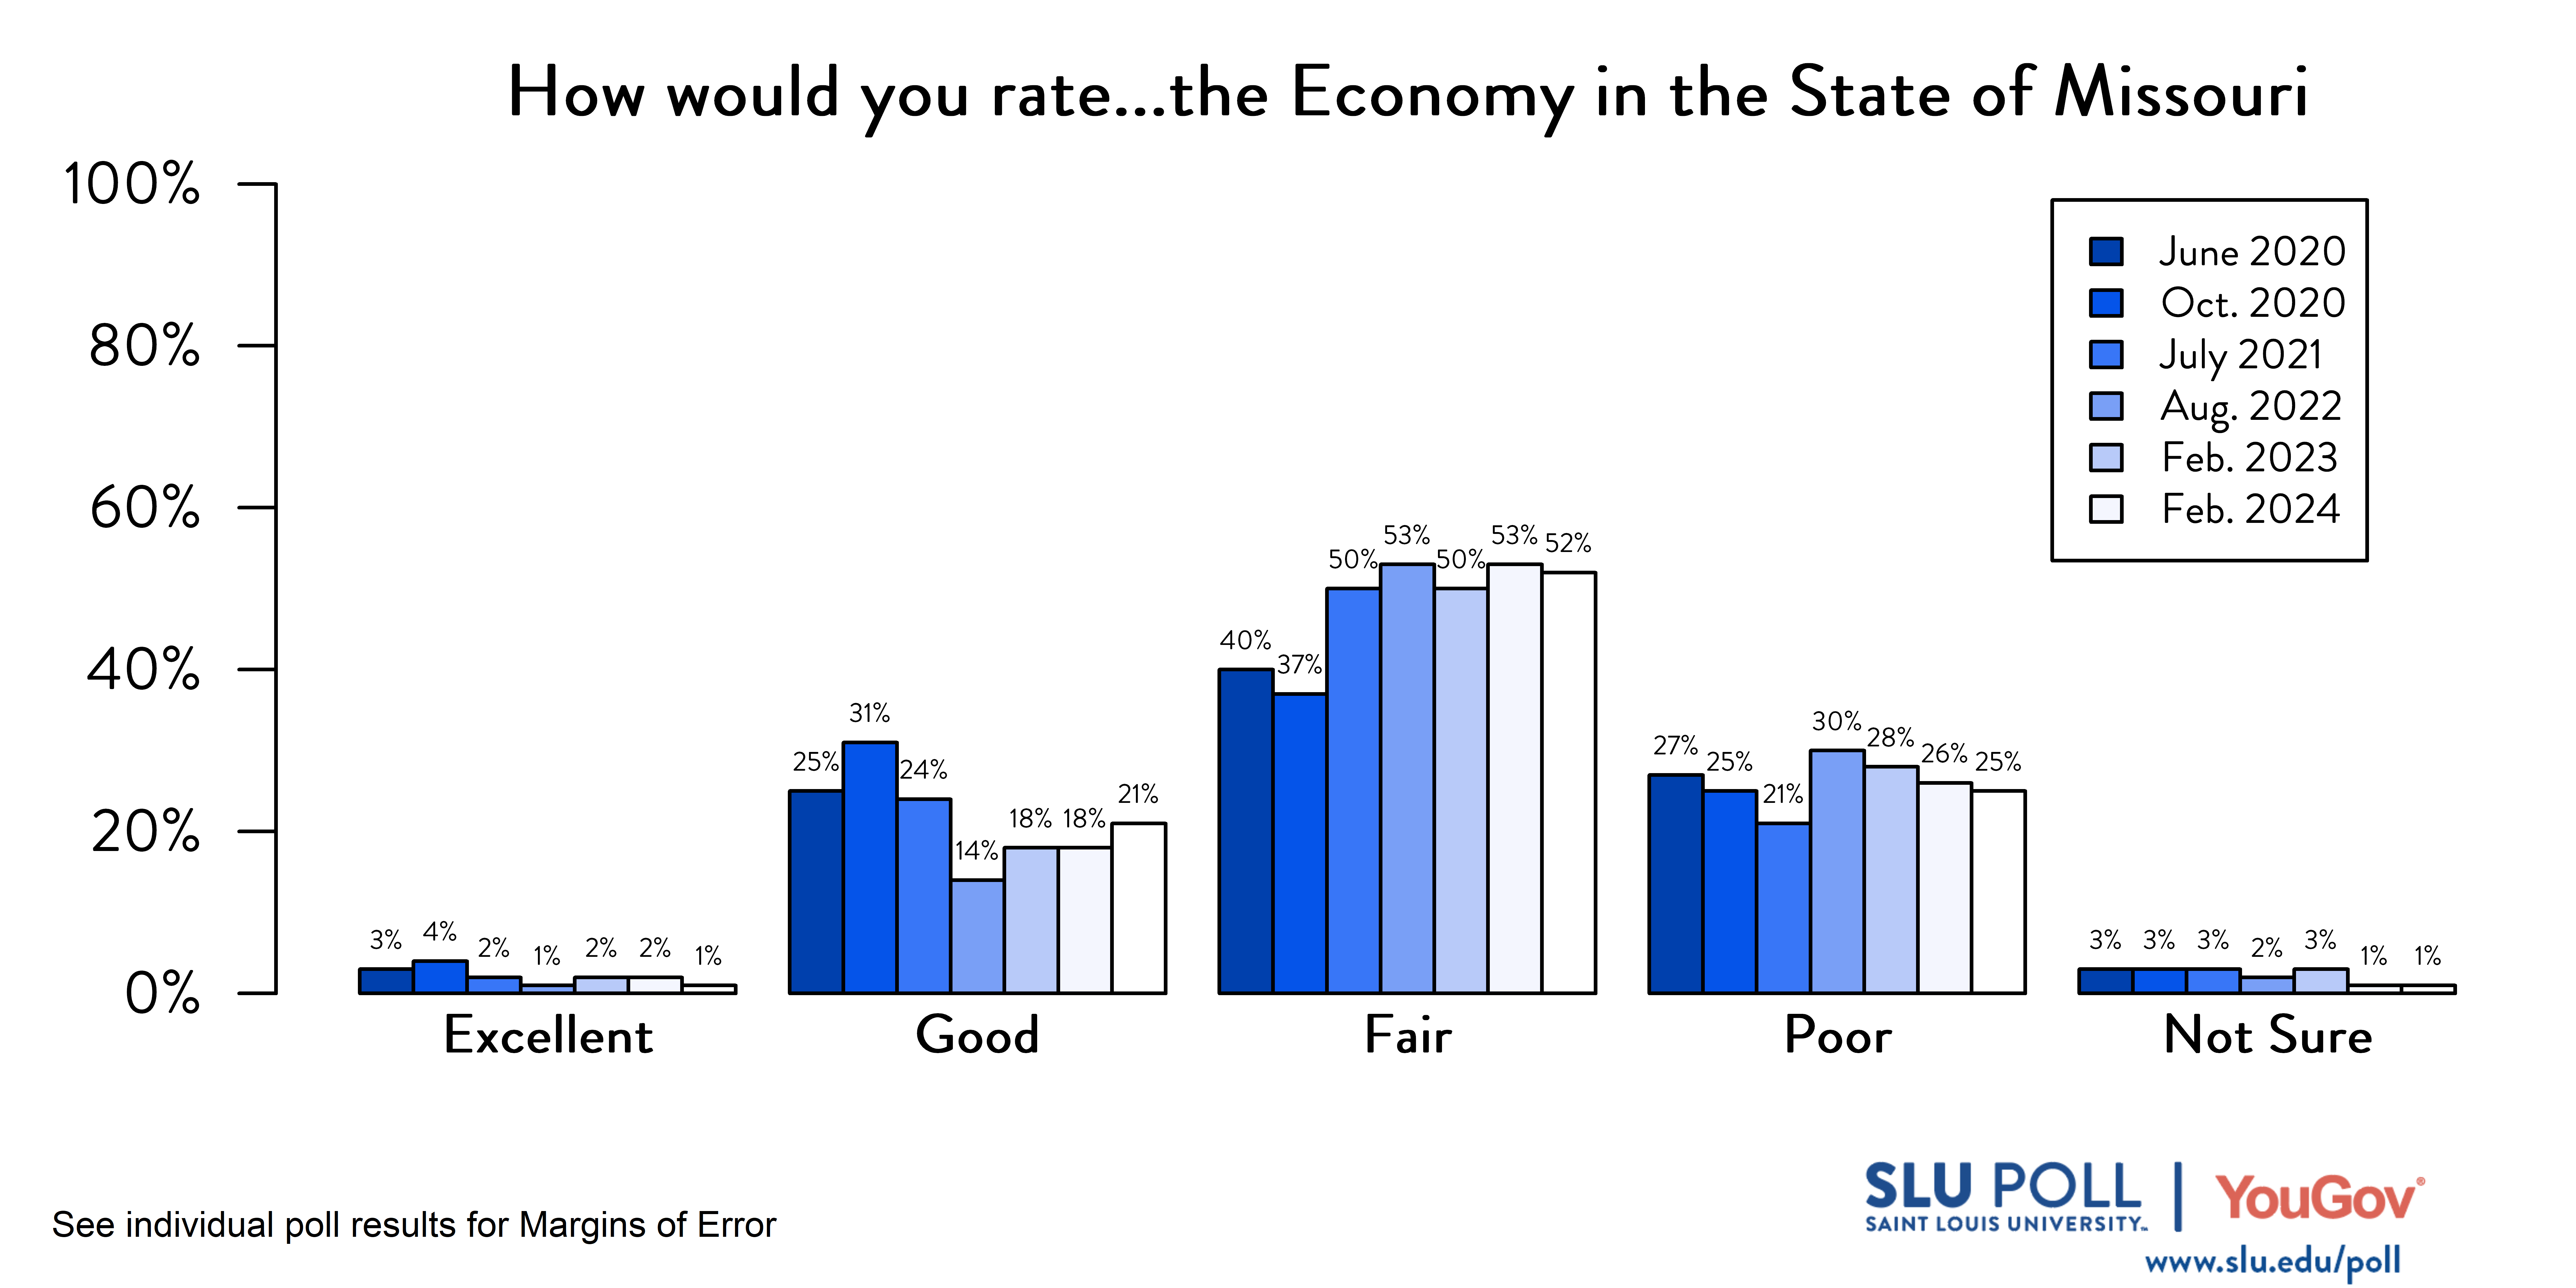 Likely voters' responses to 'How would you rate the condition of the following…The Economy in the State of Missouri?'. June 2020 Voter Responses 3% Excellent, 25% Good, 40% Fair, 27% Poor, and 3% Not Sure. October 2020 Voter Responses: 4% Excellent, 31% Good, 37% Fair, 25% Poor, and 3% Not sure. July 2021 Voter Responses: 2% Excellent, 24% Good, 50% Fair, 21% Poor, and 3% Not sure. August 2022 Voter Responses: 1% Excellent, 14% Good, 53% Fair, 30% Poor, and 2% Not sure. February 2023 Voter Responses: 2% Excellent, 18% Good, 50% Fair, 28% Poor, and 3% Not sure. February 2024 Voter Responses: 1% Excellent, 21% Good, 52% Fair, 25% Poor, and 1% Not sure.